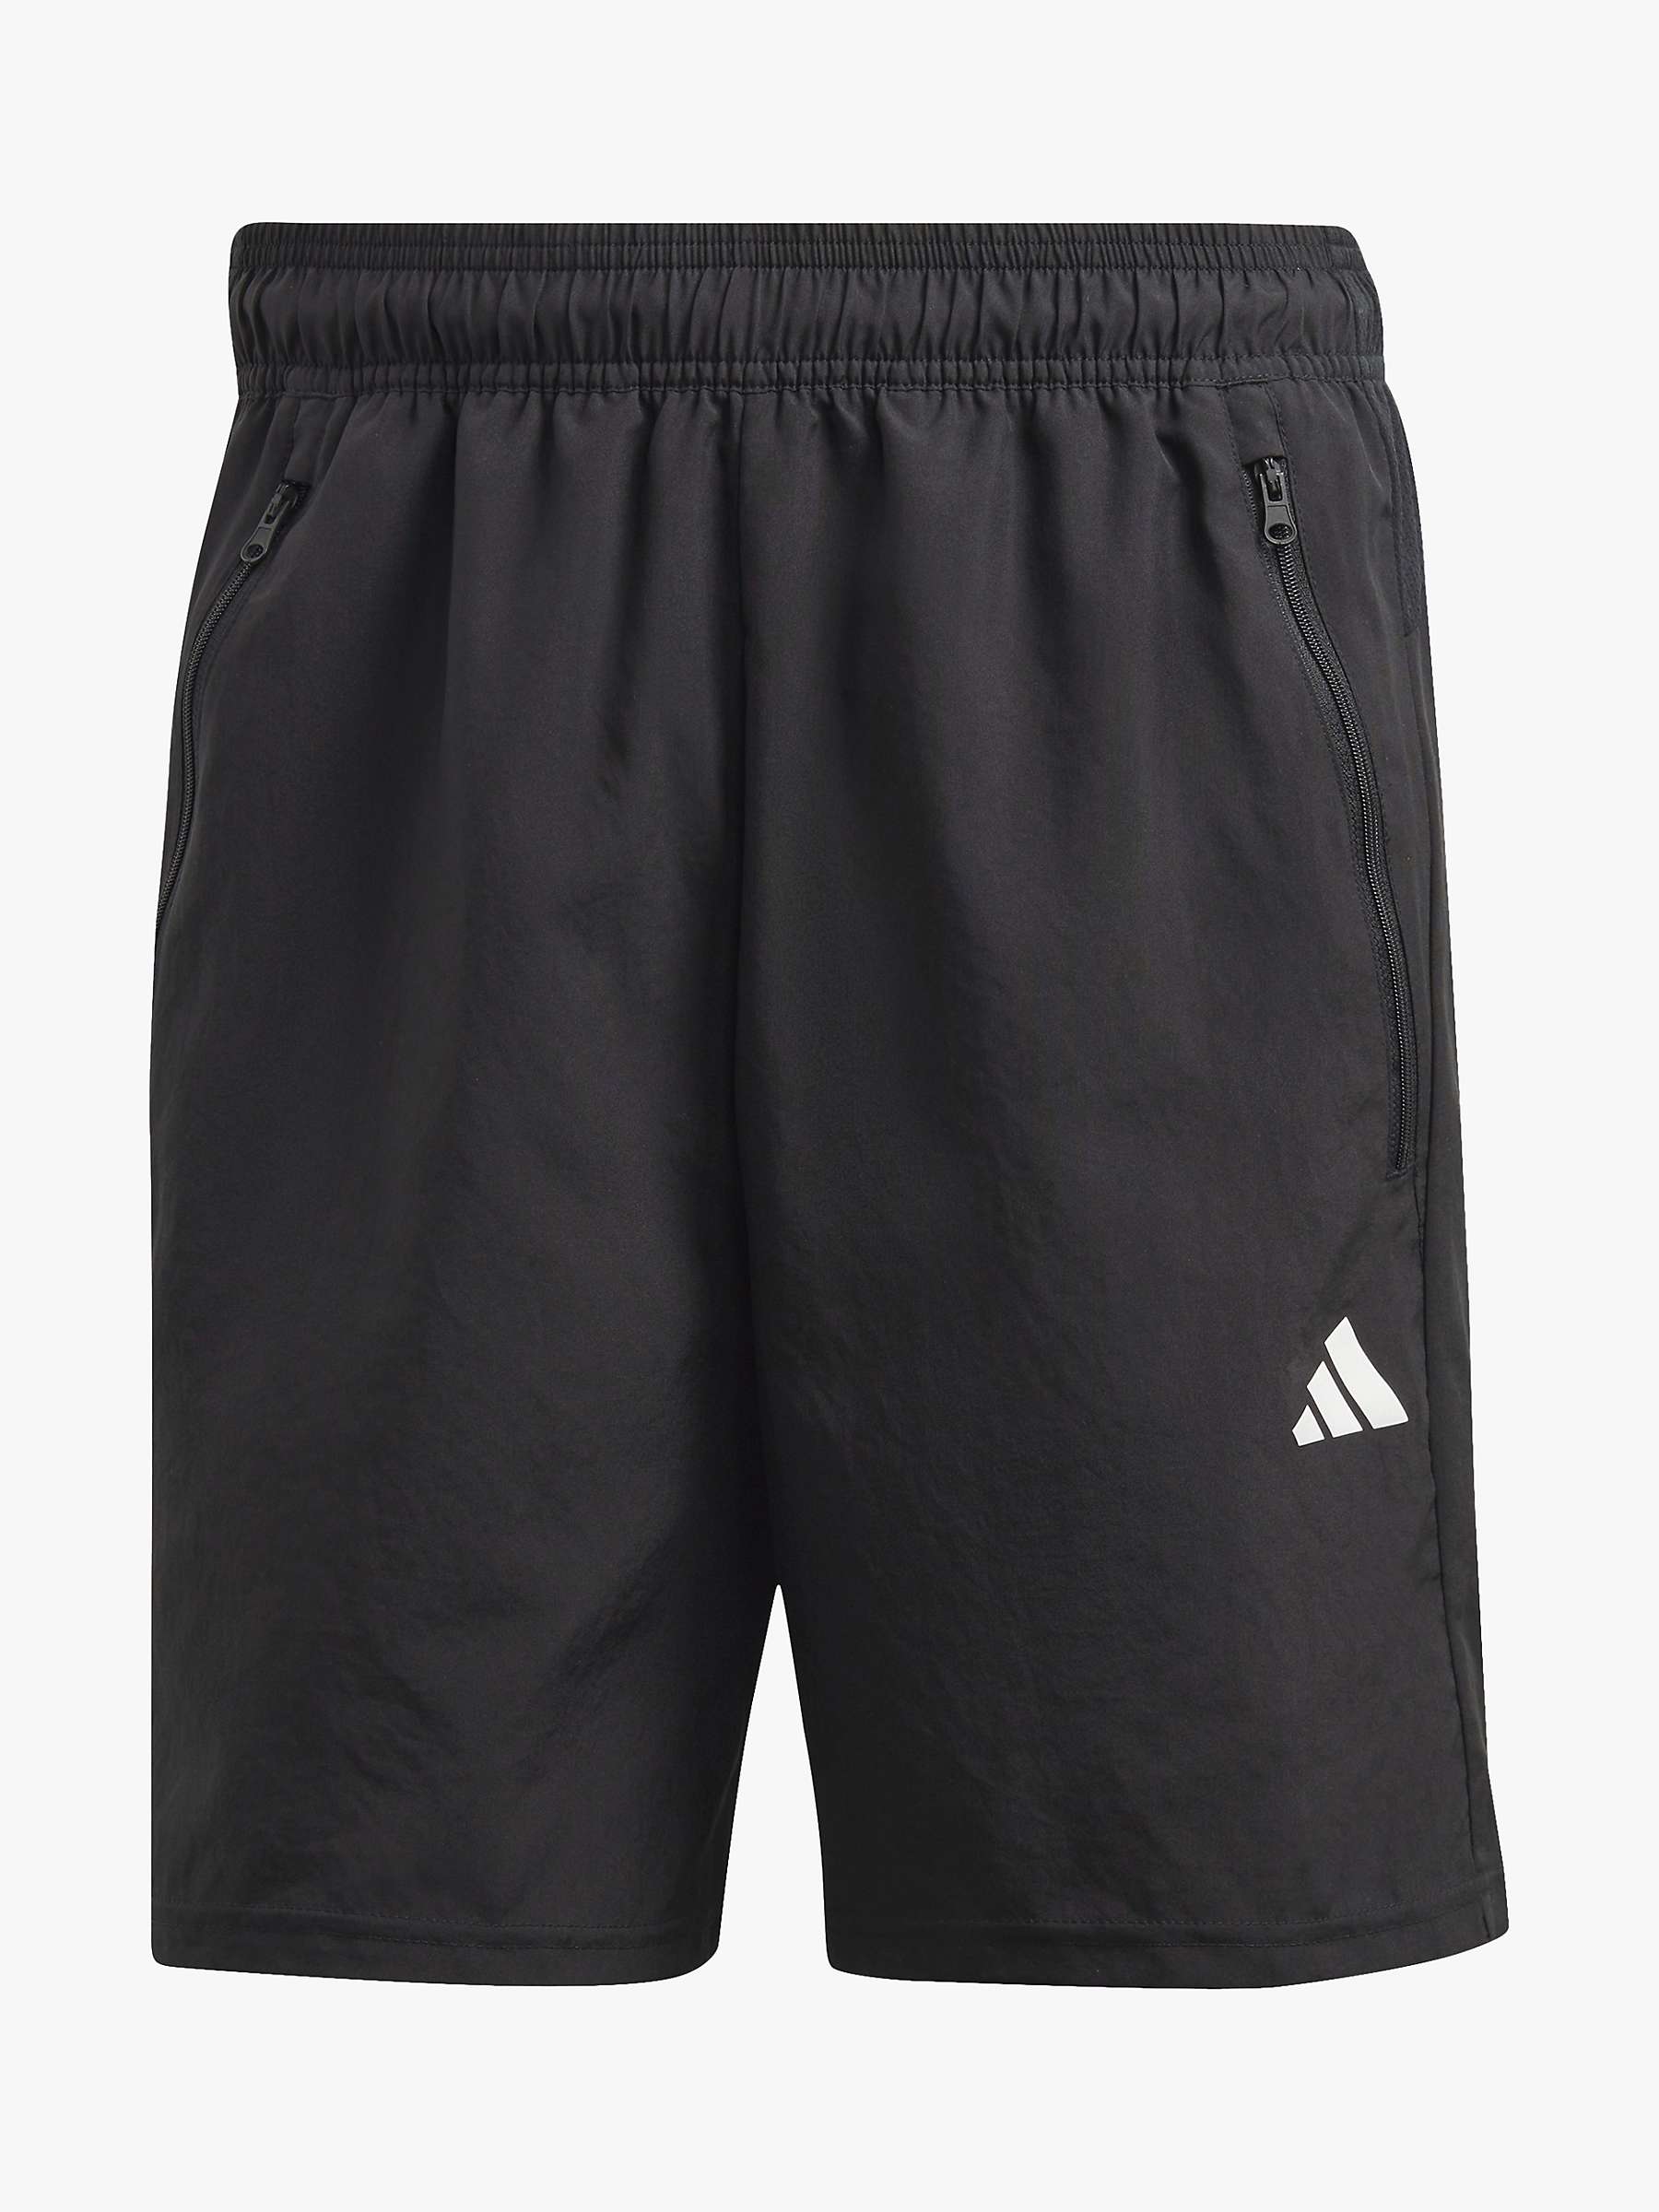 Buy adidas Train Essentials Woven Recycled Gym Shorts Online at johnlewis.com